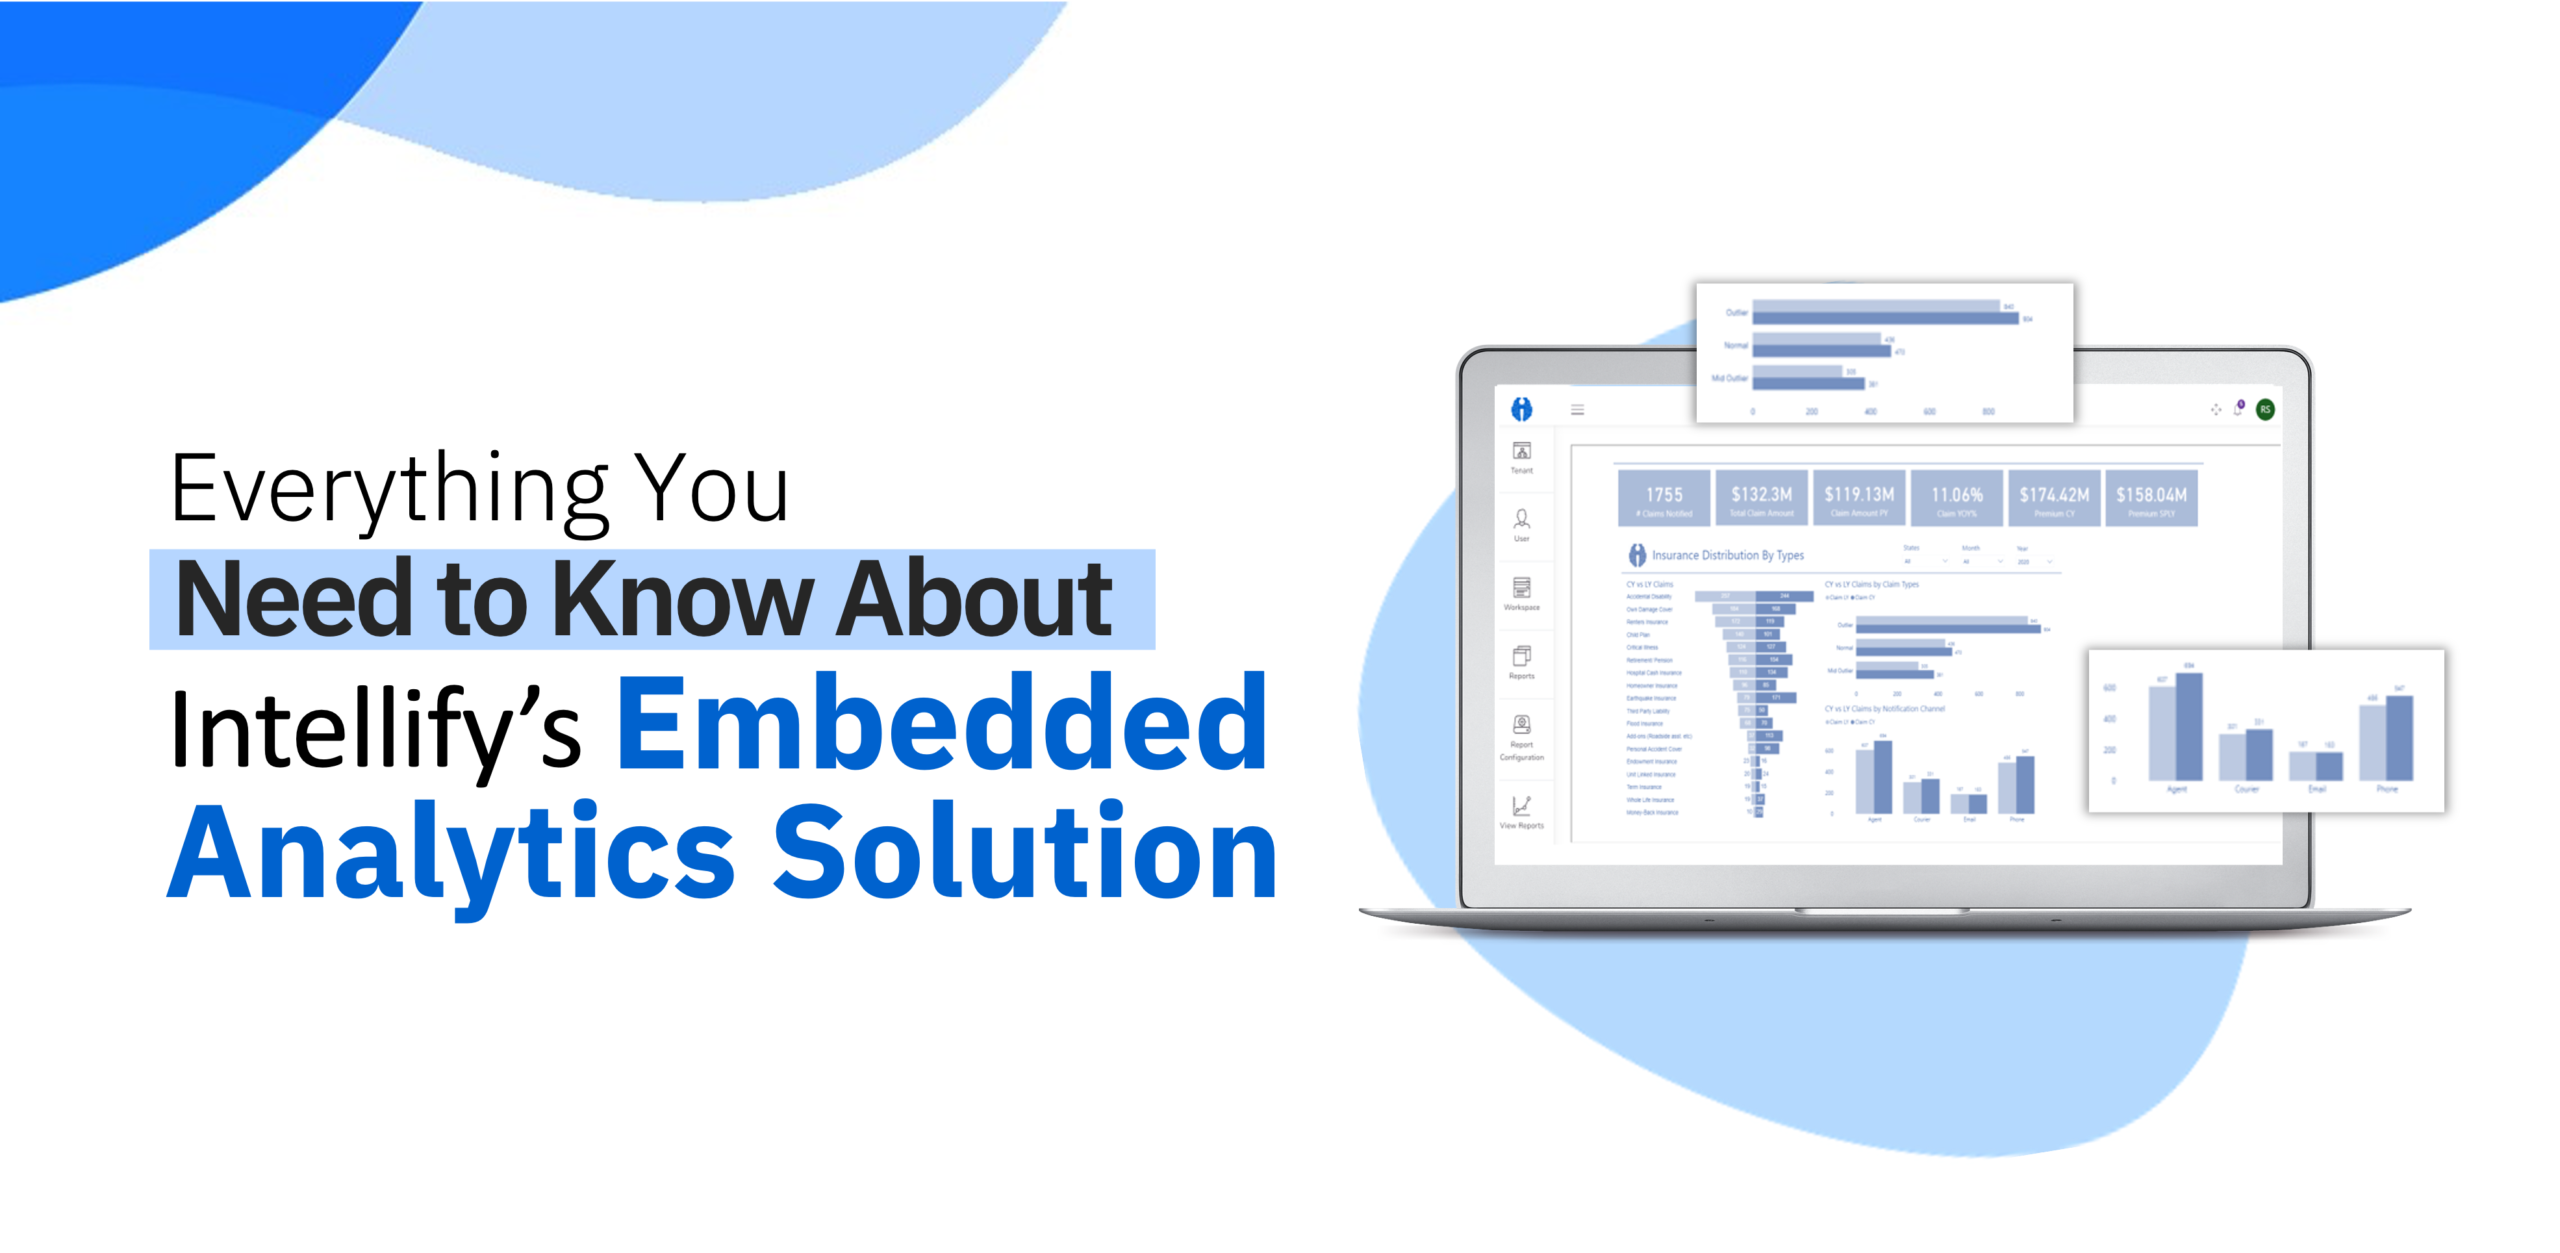 Everything You Need to Know About Intellify’s Embedded Analytics Solution